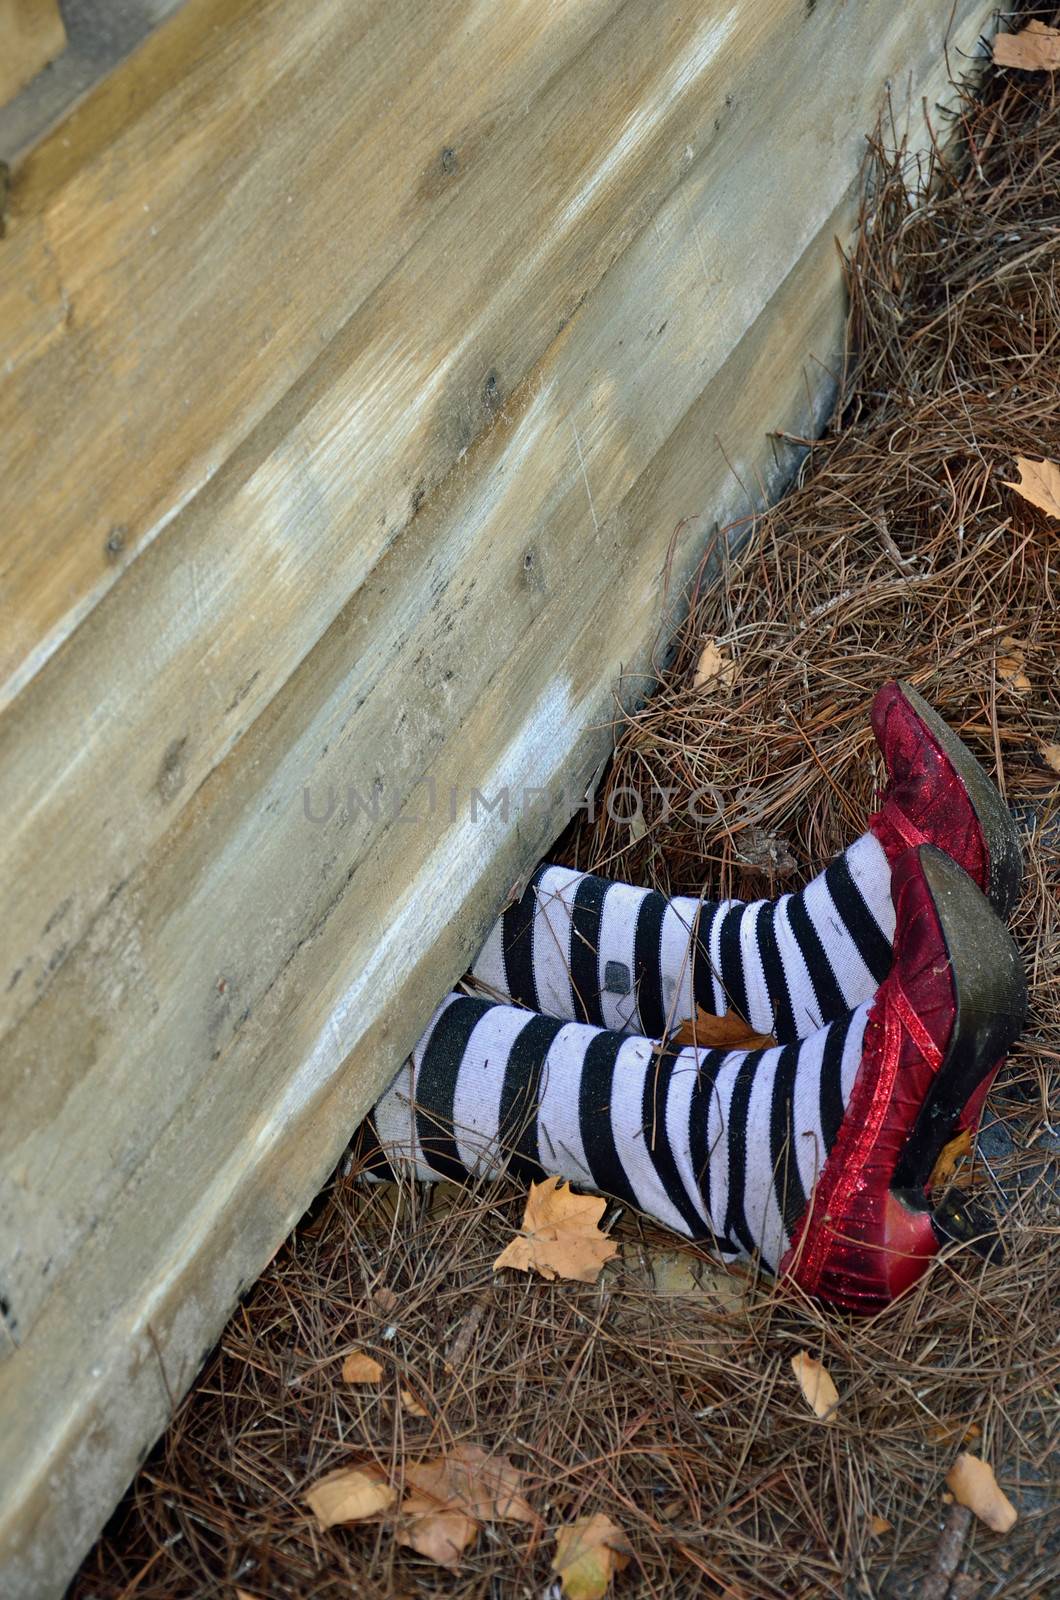 A house appears to have fallen on a witch whose wearing striped stockings and red slippers